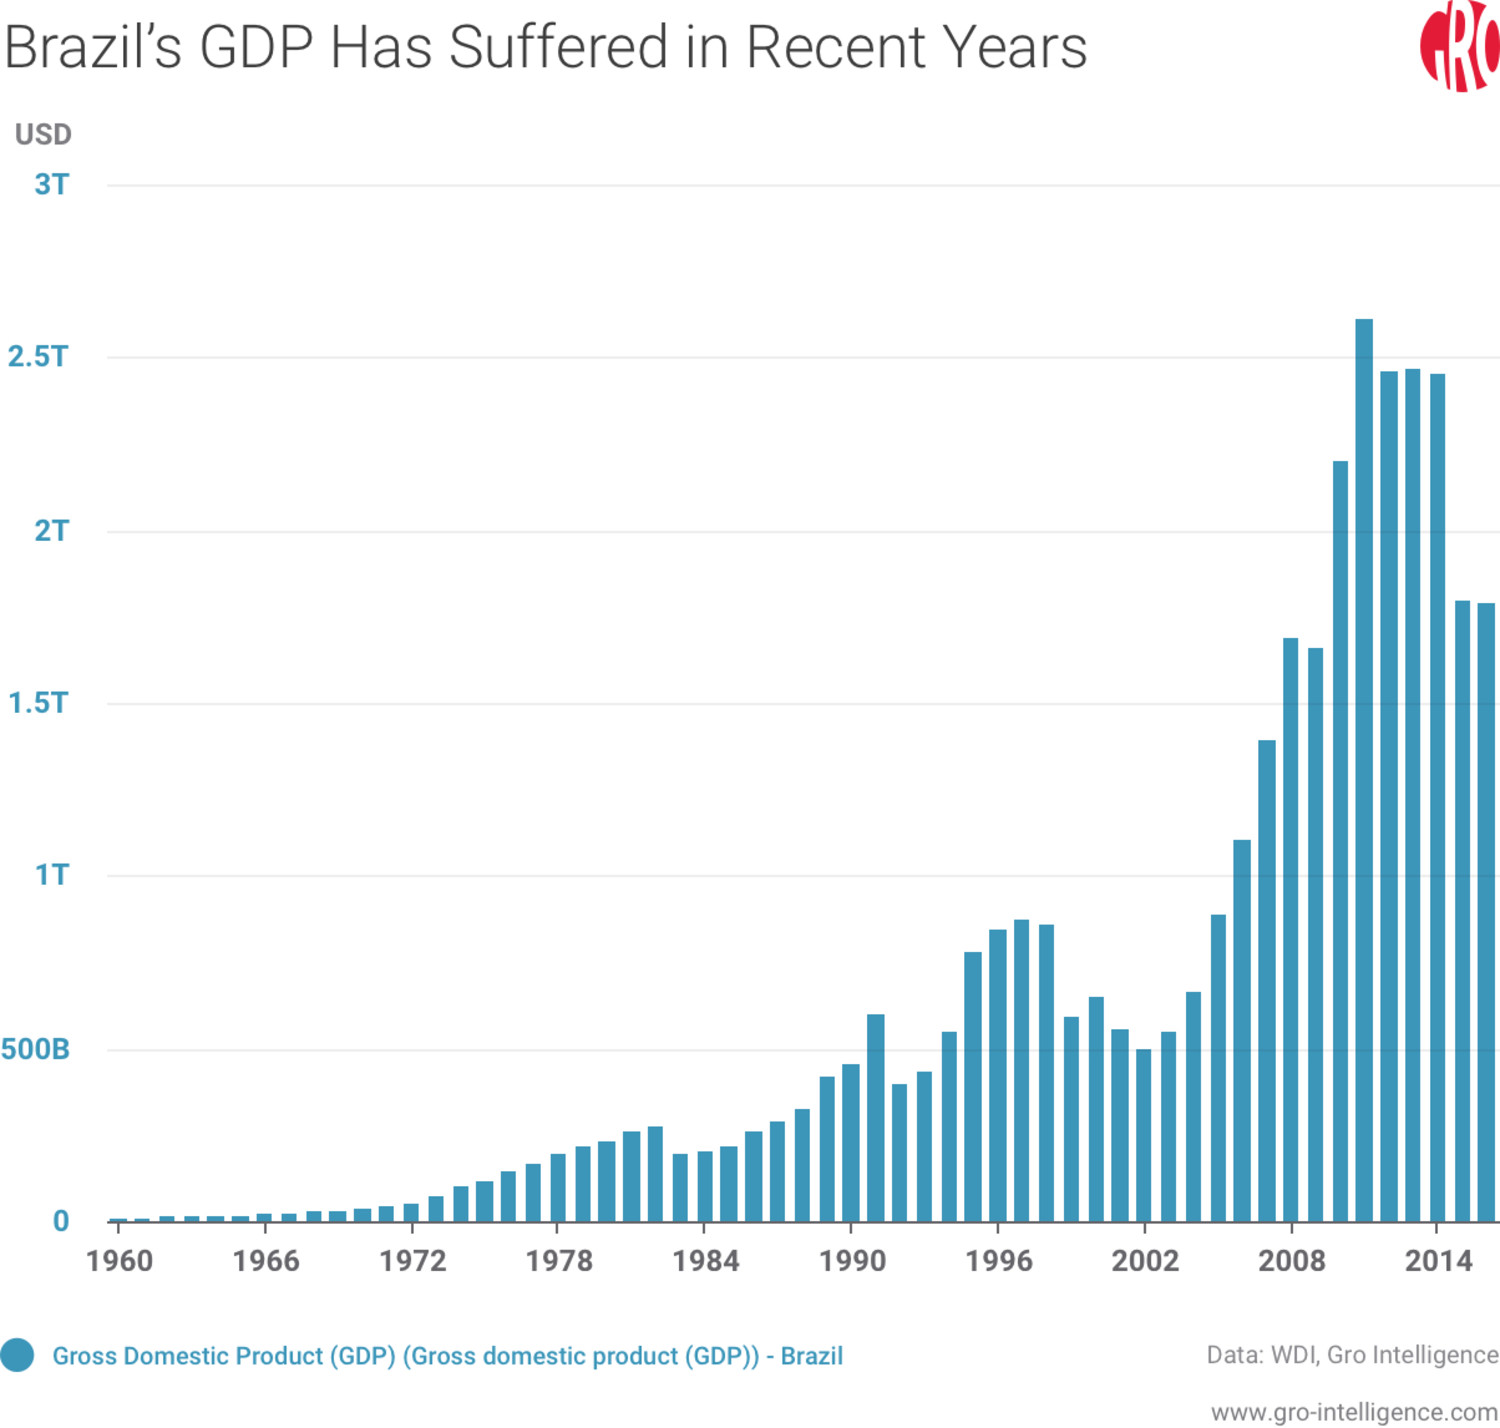 Brazil’s GDP Has Suffered in Recent Years